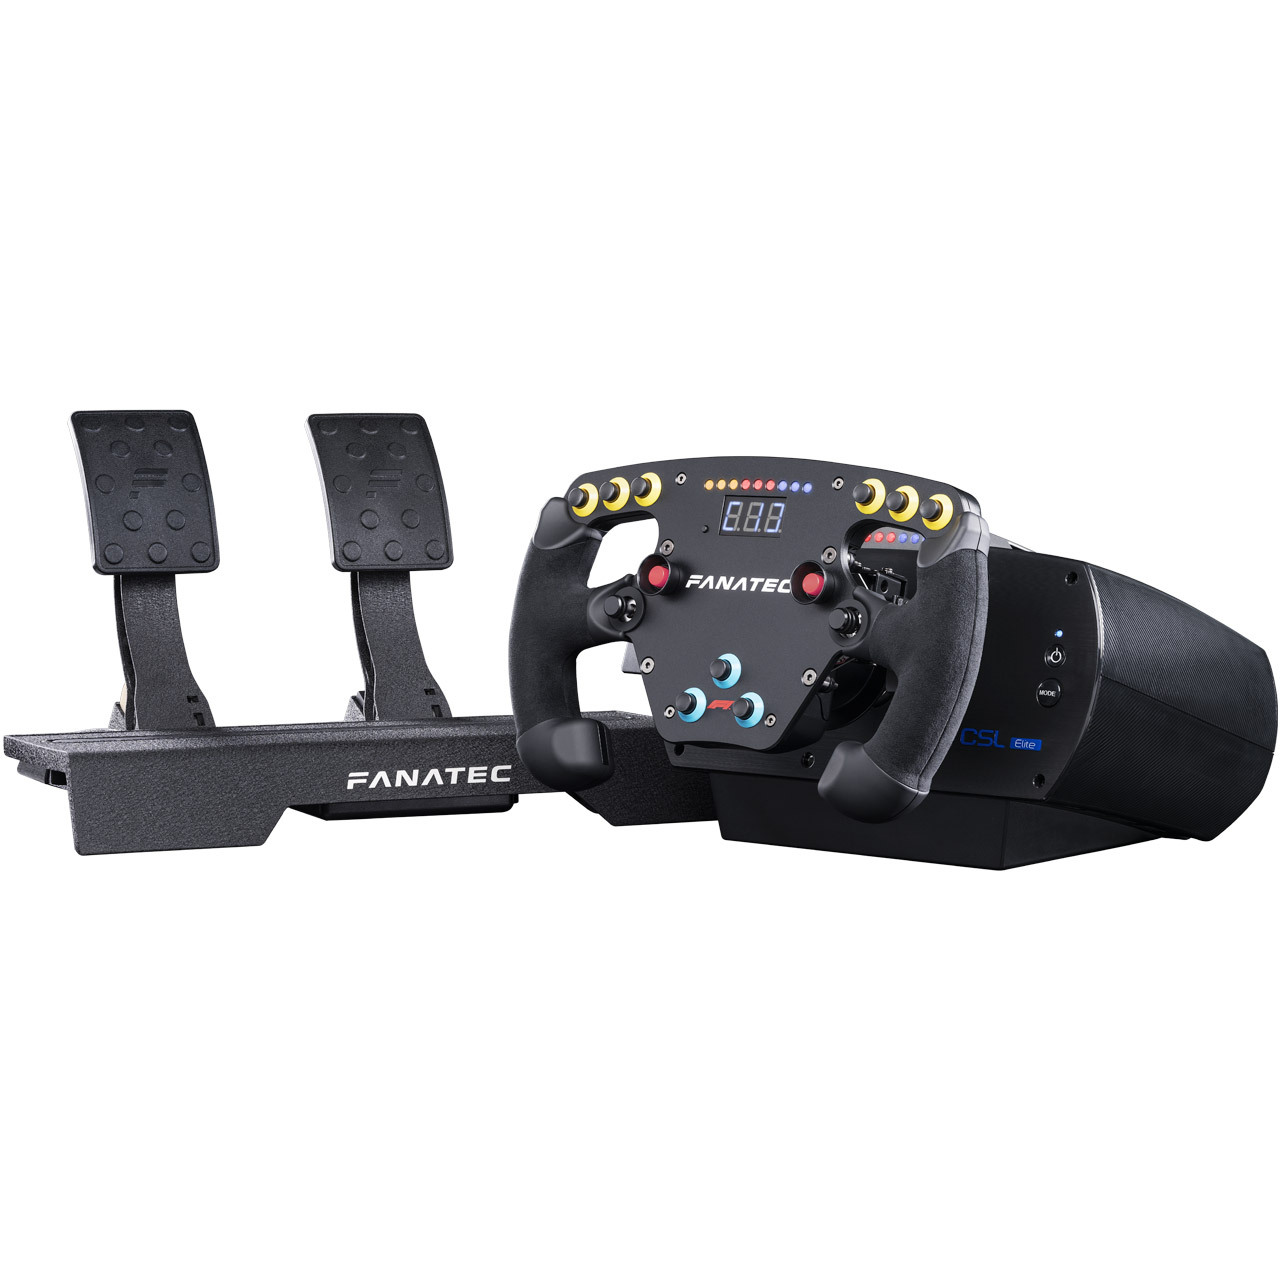 CSL Elite Set - officially licensed for PS4™ Fanatec